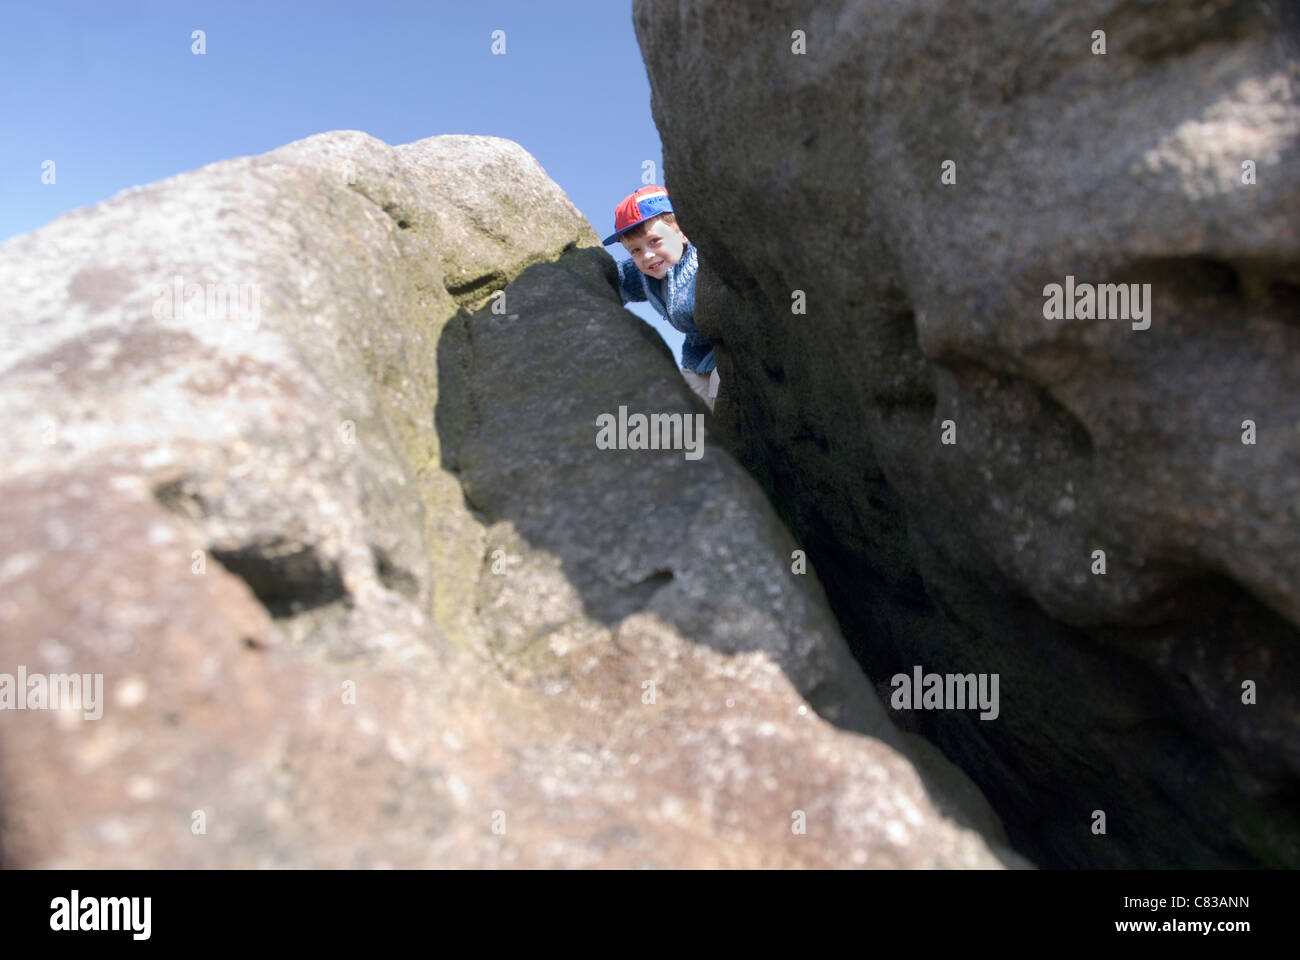 Little Boy Peaking though Crack in Giant Boulder Rock on Top of Millstone Edge, nr Surprise View, Peak District, UK Stock Photo